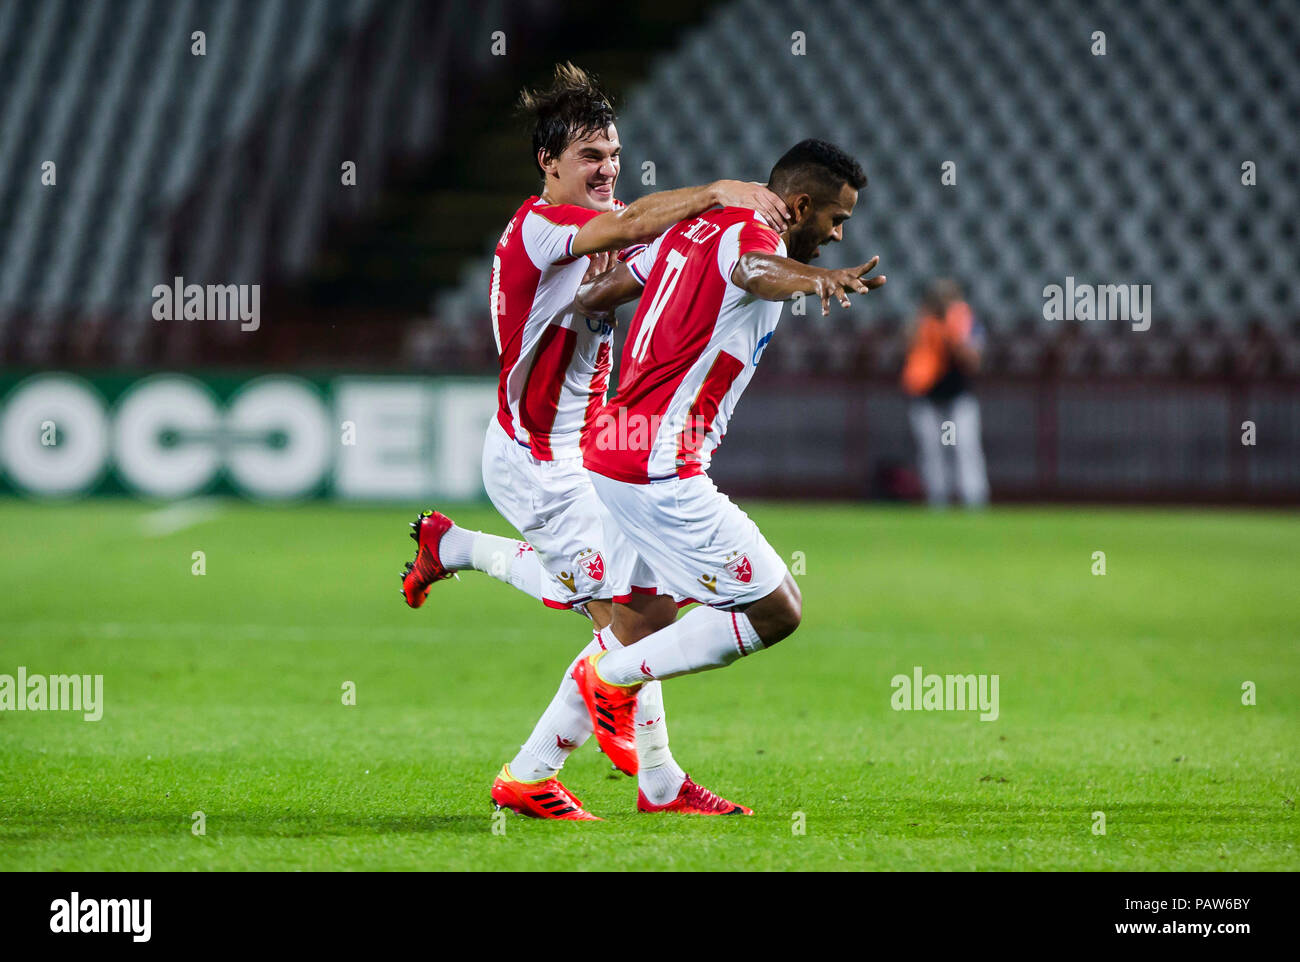 Belgrade, Serbia. 17th July, 2018. Crvena Zvezda's Lorenzo Ebecilio (L)  vies with Spartak's Vitor Silva Honorato during the first qualifying round  UEFA Champions League football match between Crvena Zvezda and Spartaks in